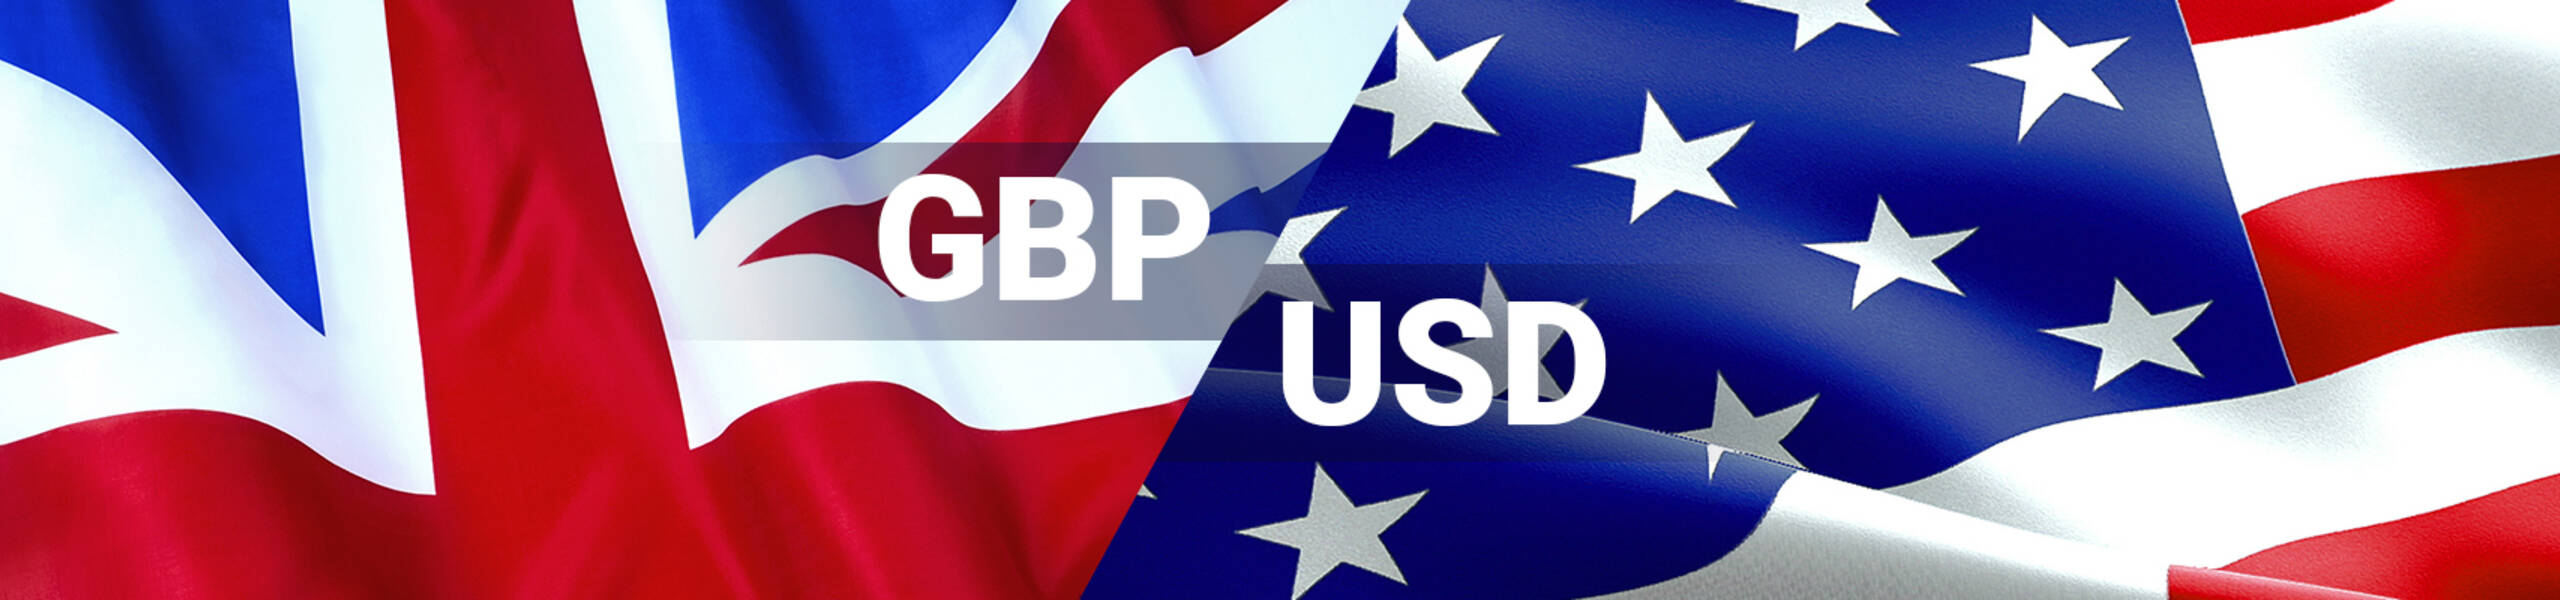 GBP/USD: pound reached SSB’s support